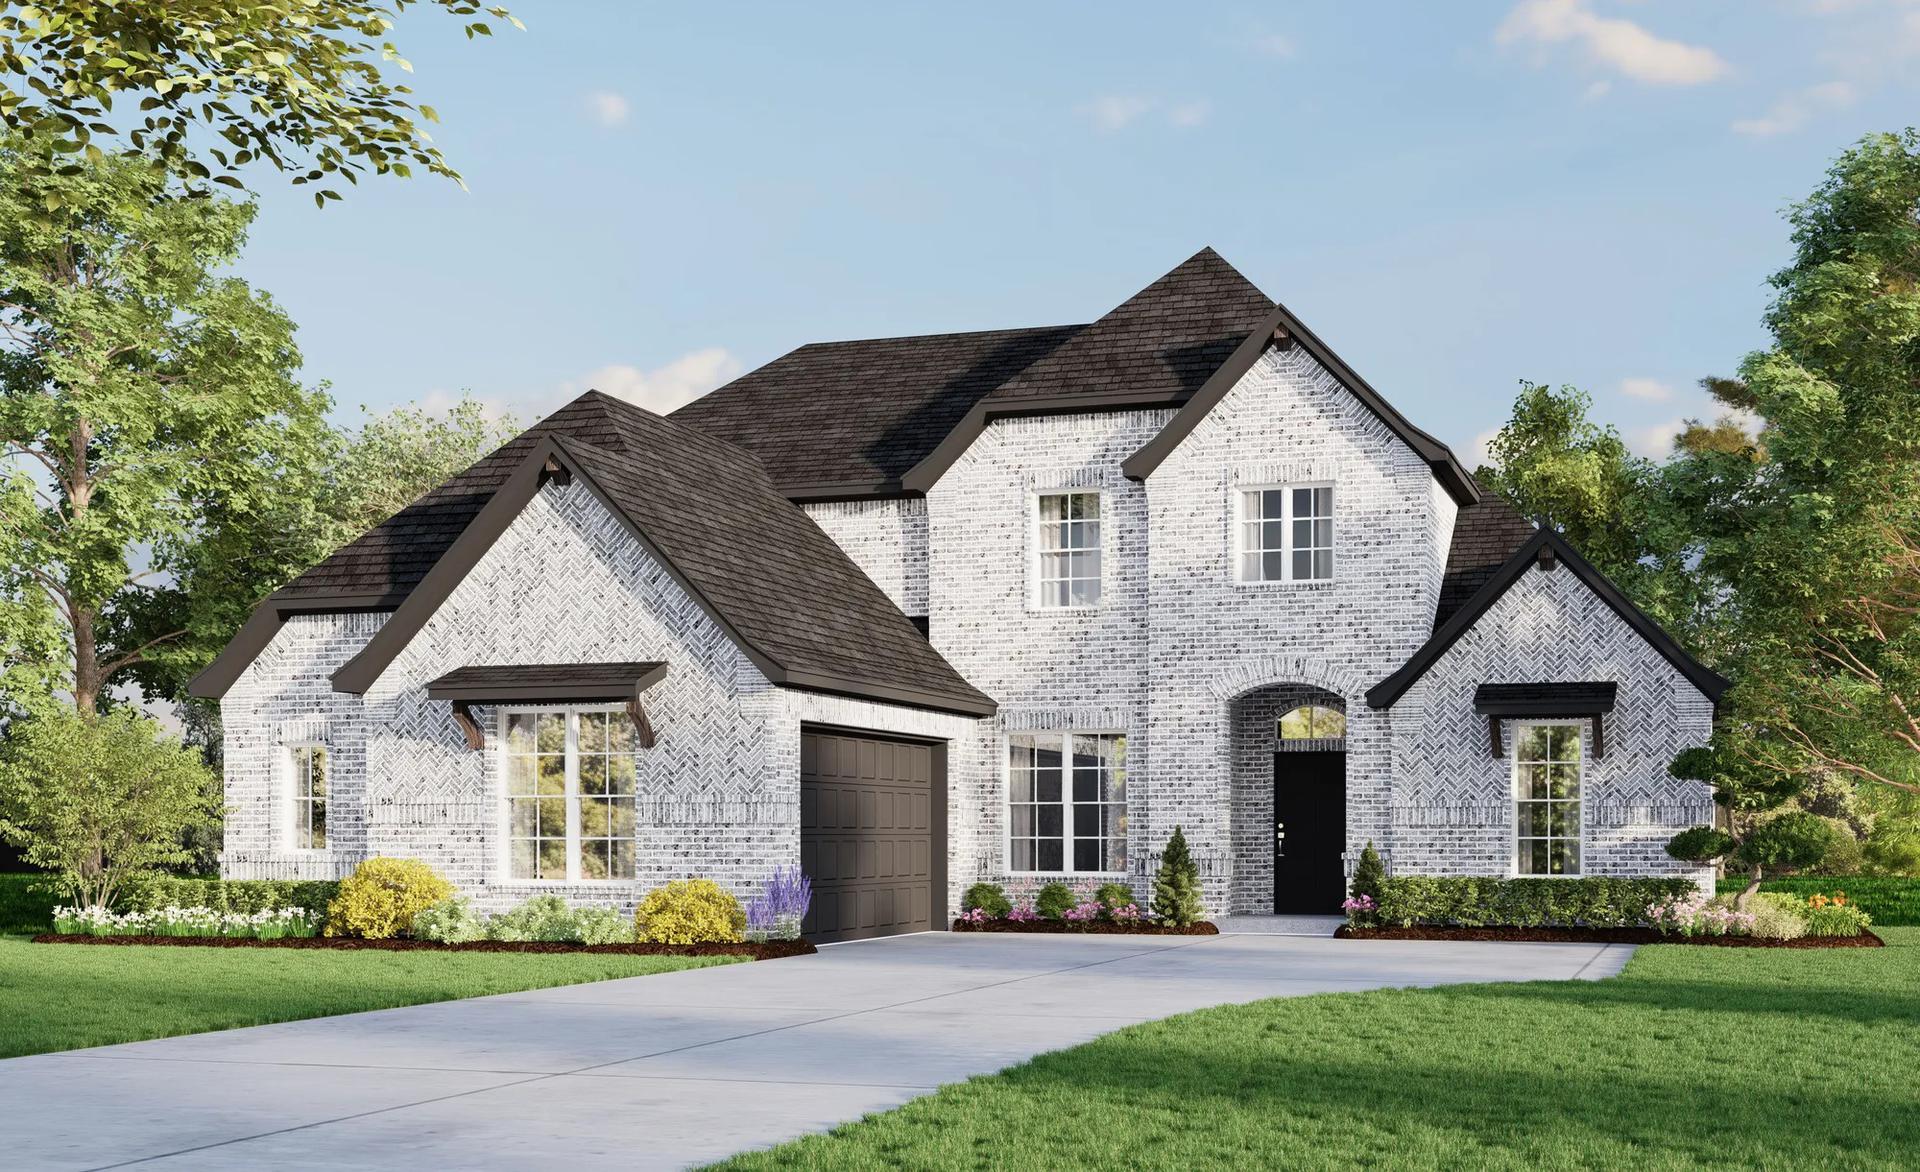 2972 C. Concept 2972 Home with 4 Bedrooms